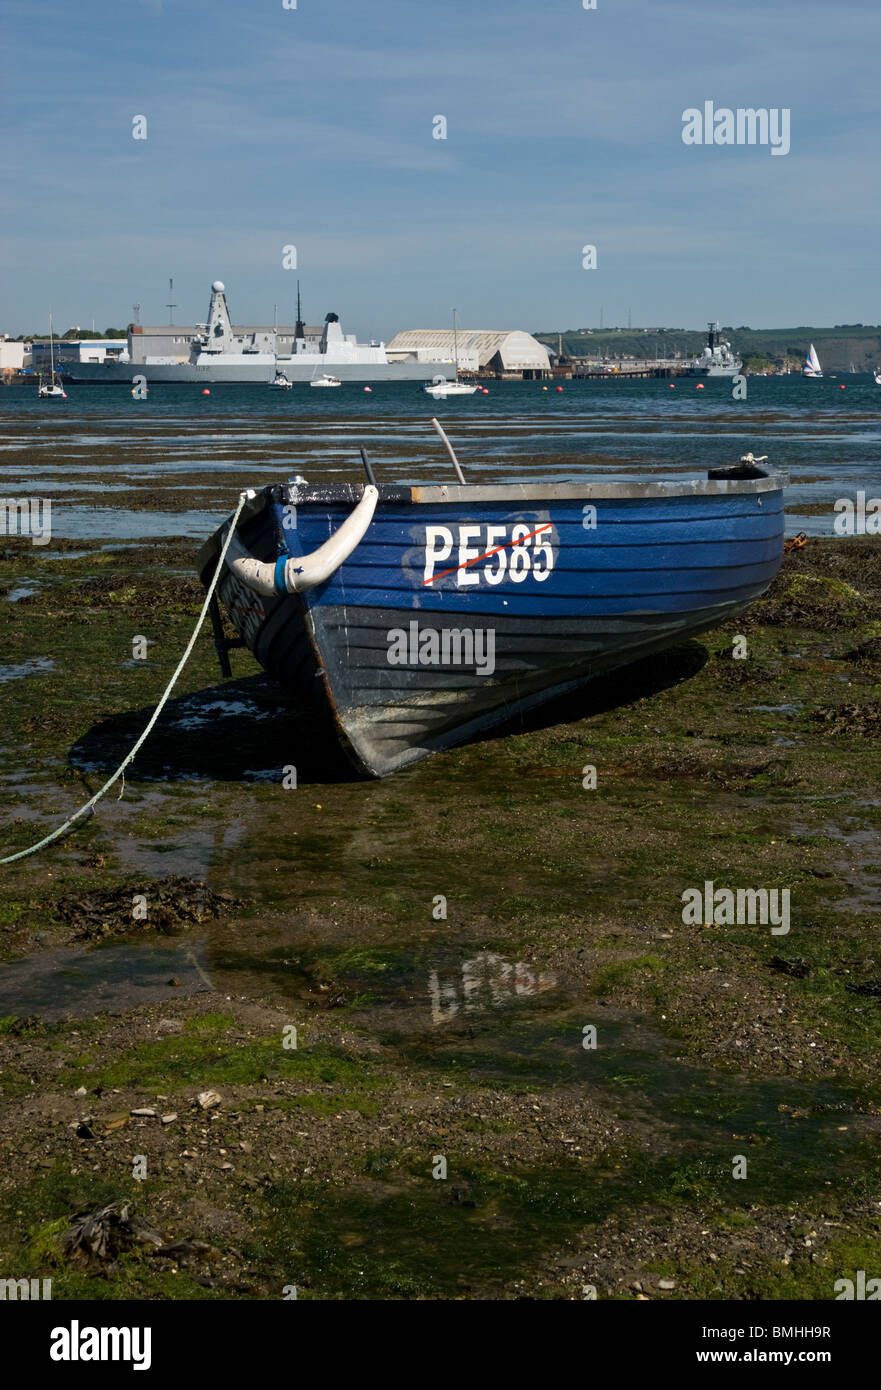 A small wooden boat moored at shore with the Destoyer Daring in the background Stock Photo